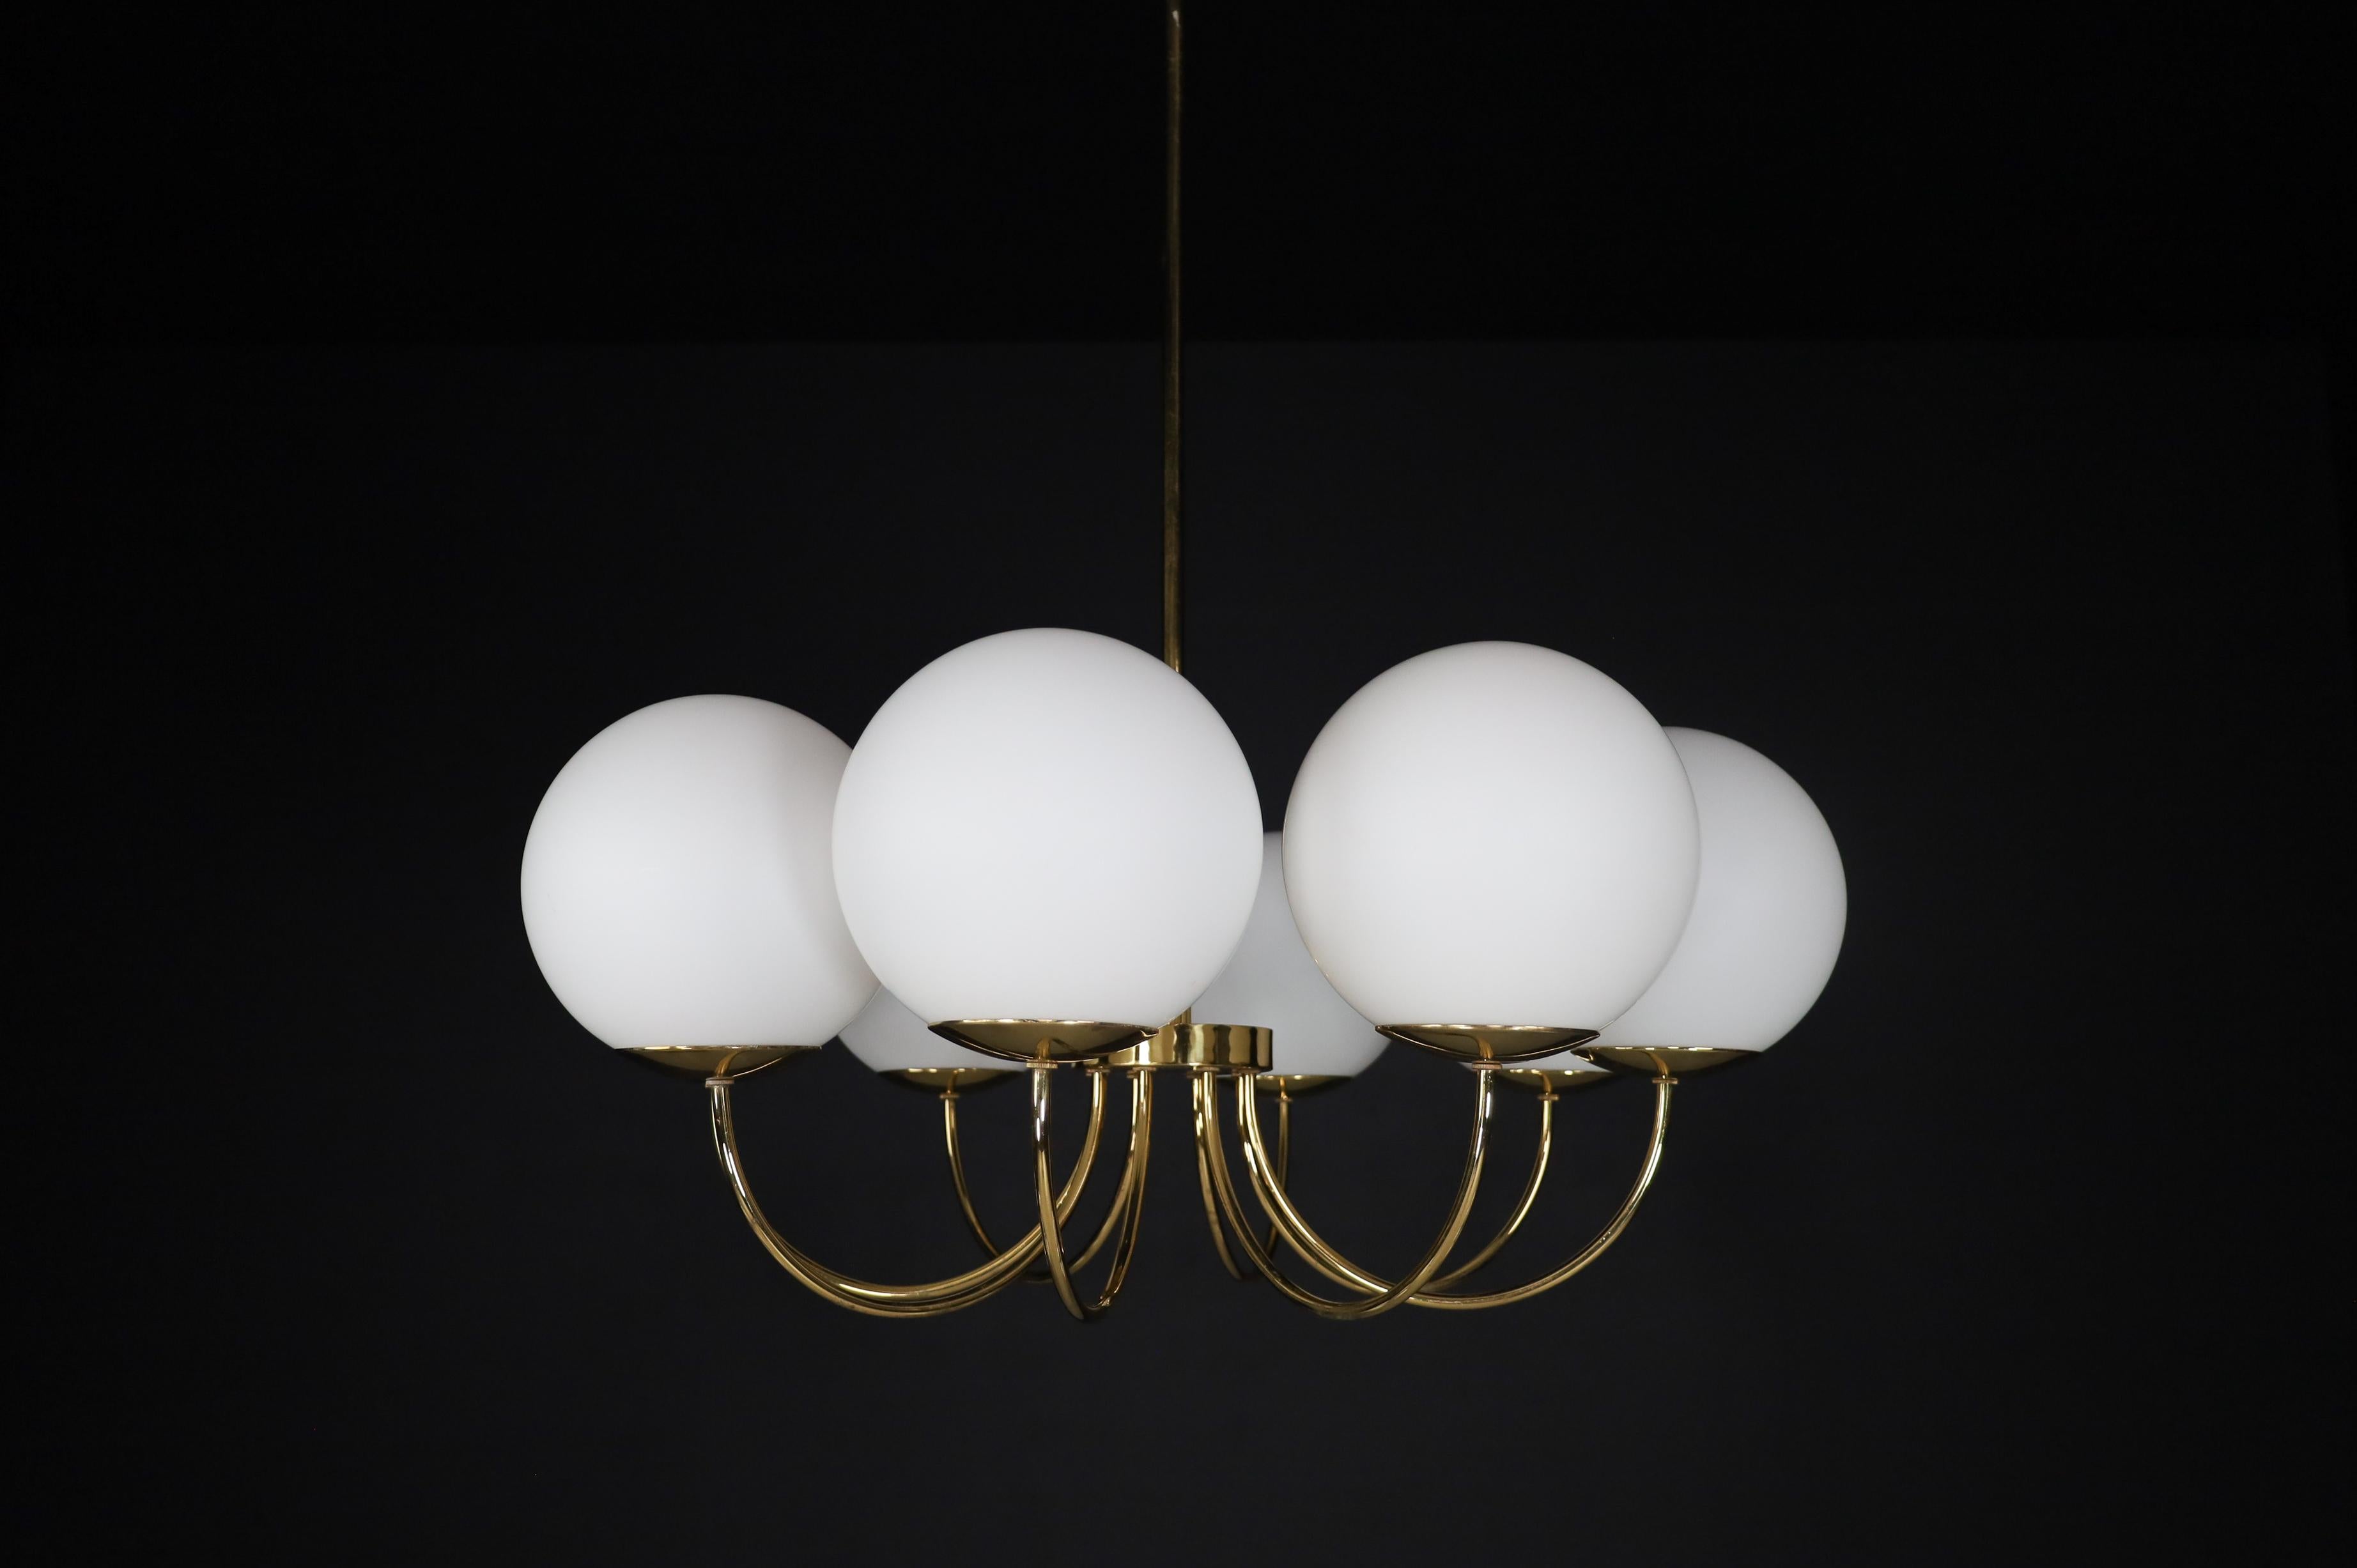 1 of 3 Elegant Chandeliers with Brass Fixture and Opaline Glass Globes, 1960s For Sale 4